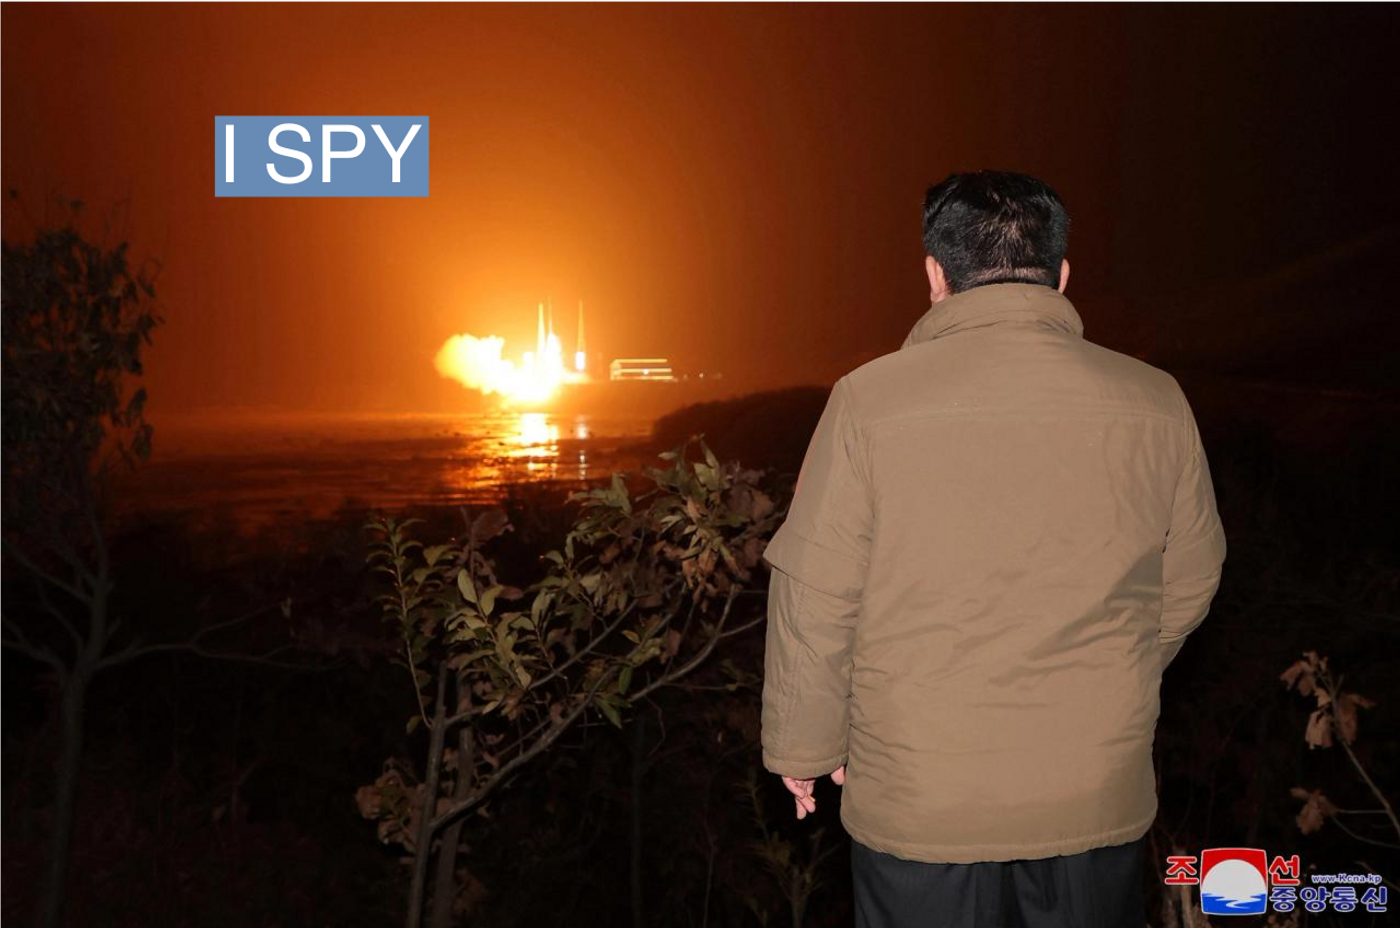 North Korean leader Kim Jong Un looks on as a rocket carrying a spy satellite Malligyong-1 is launched, as North Korean government claims, in a location given as North Gyeongsang Province, North Korea in this handout picture obtained by Reuters on November 21, 2023. KCNA via REUTERS